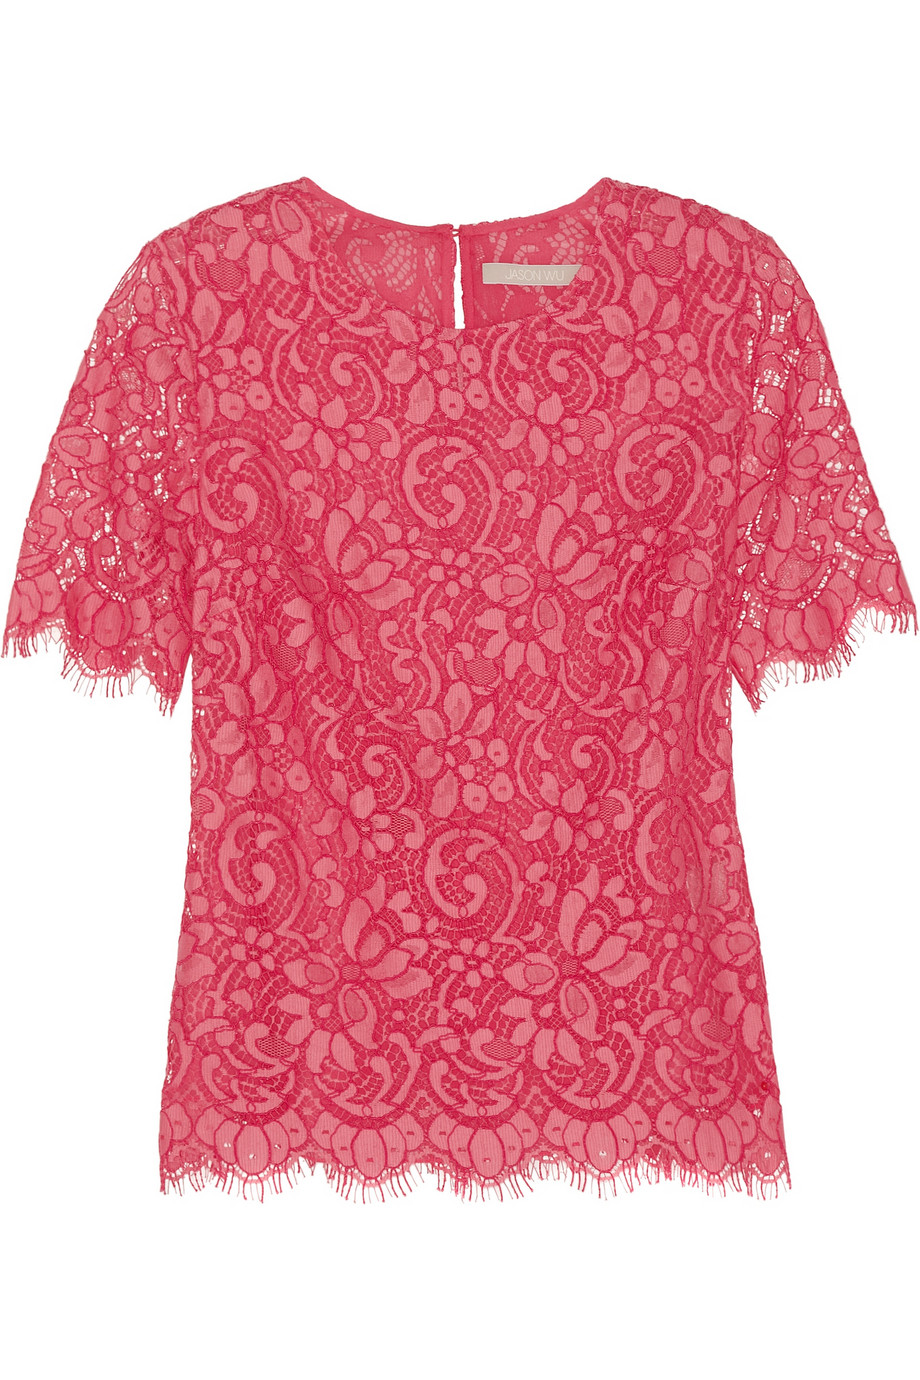 Jason wu Floral Lace Top in Pink | Lyst